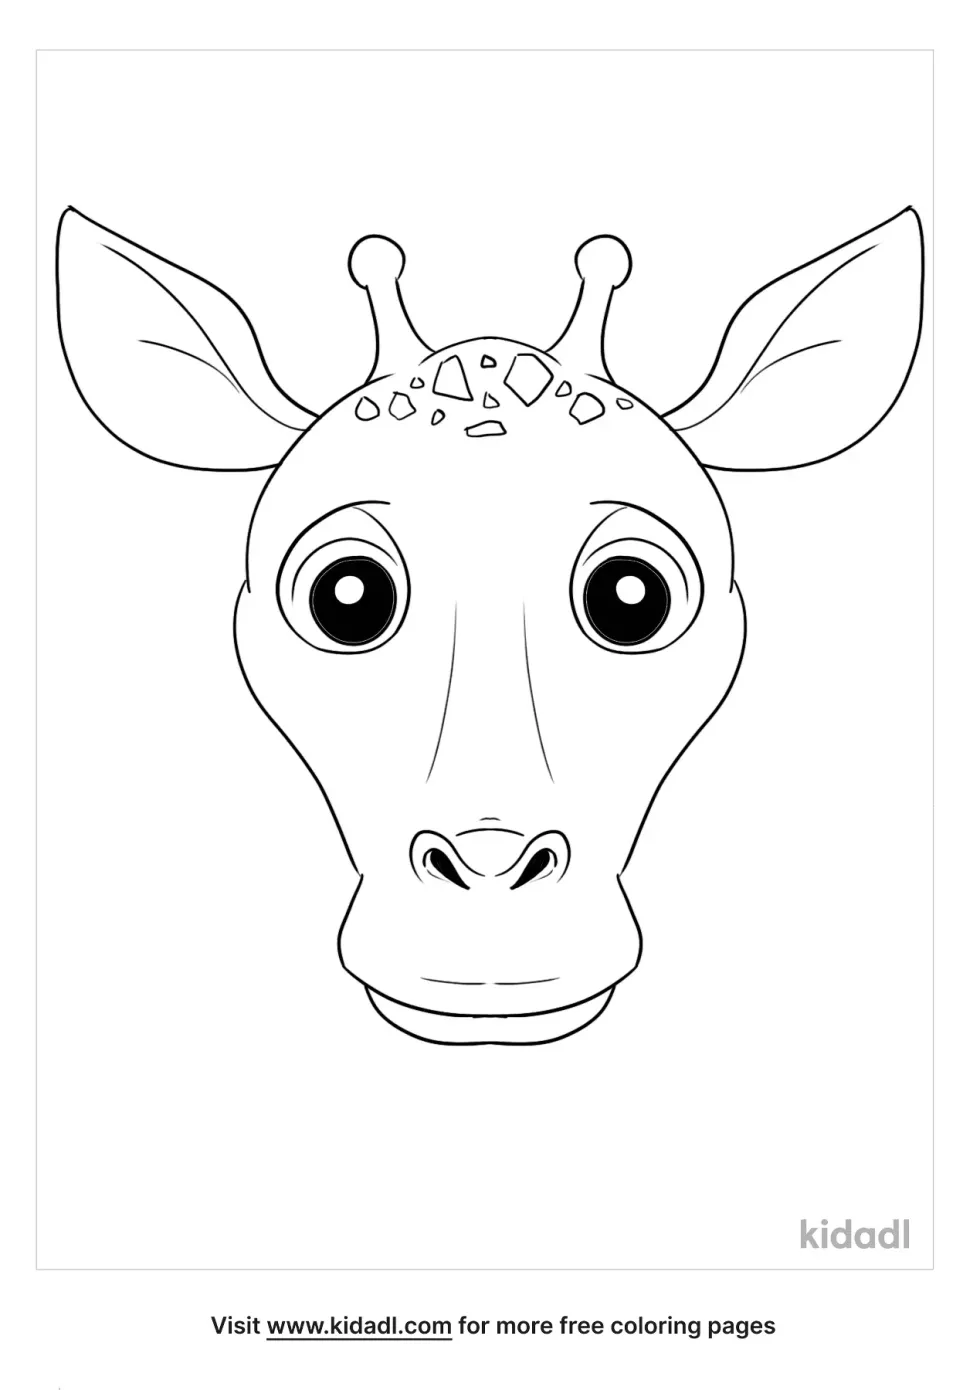 Giraffe Face Coloring Page